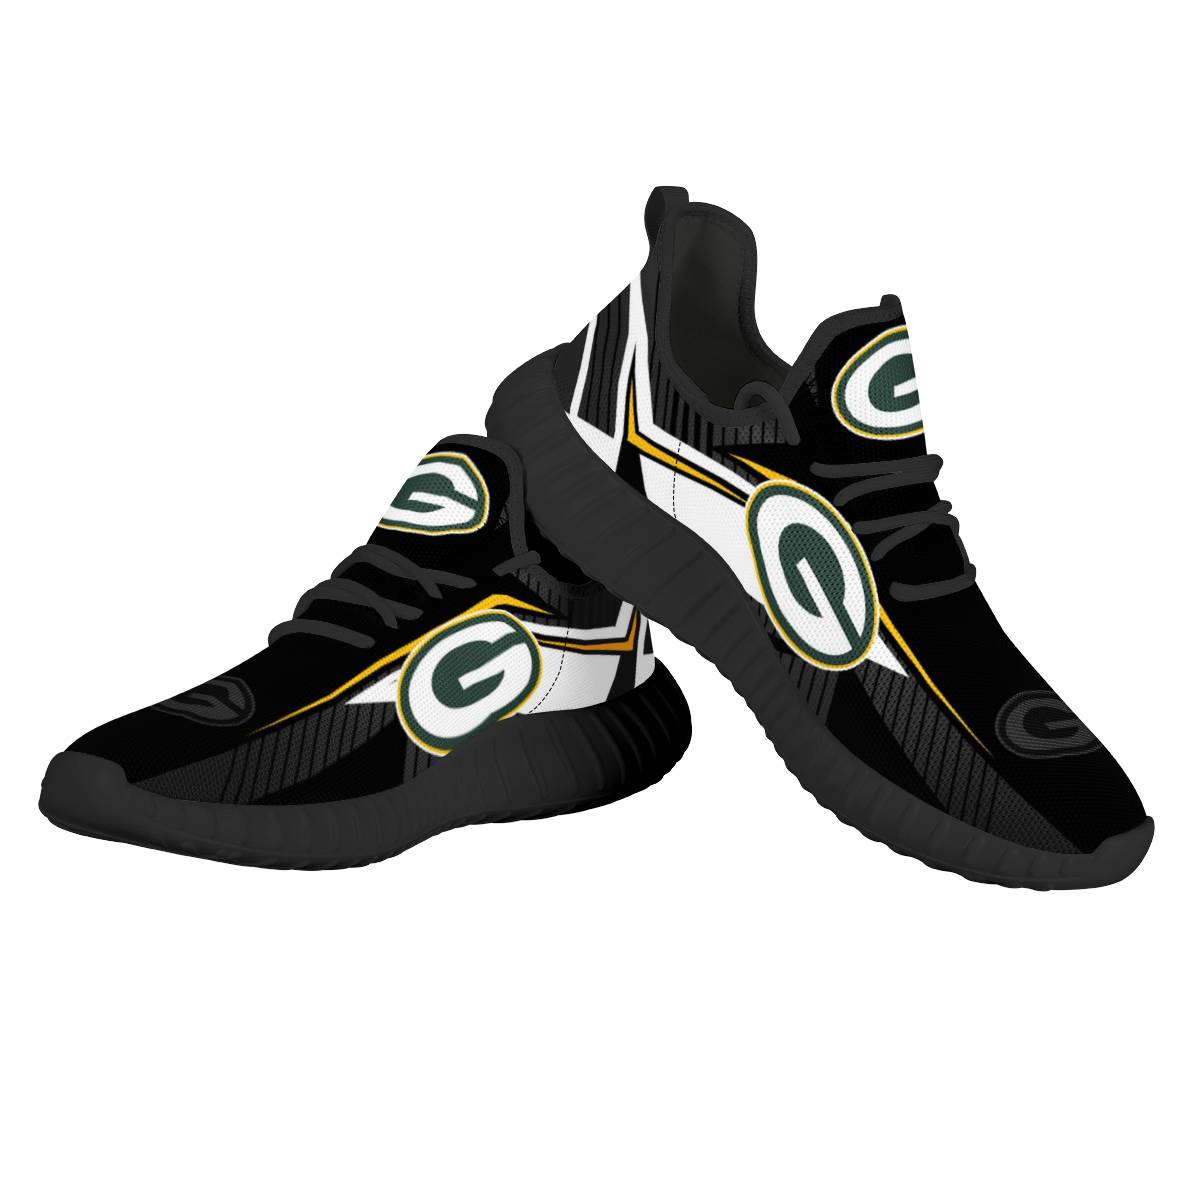 Men's NFL Green Bay Packers Mesh Knit Sneakers/Shoes 006